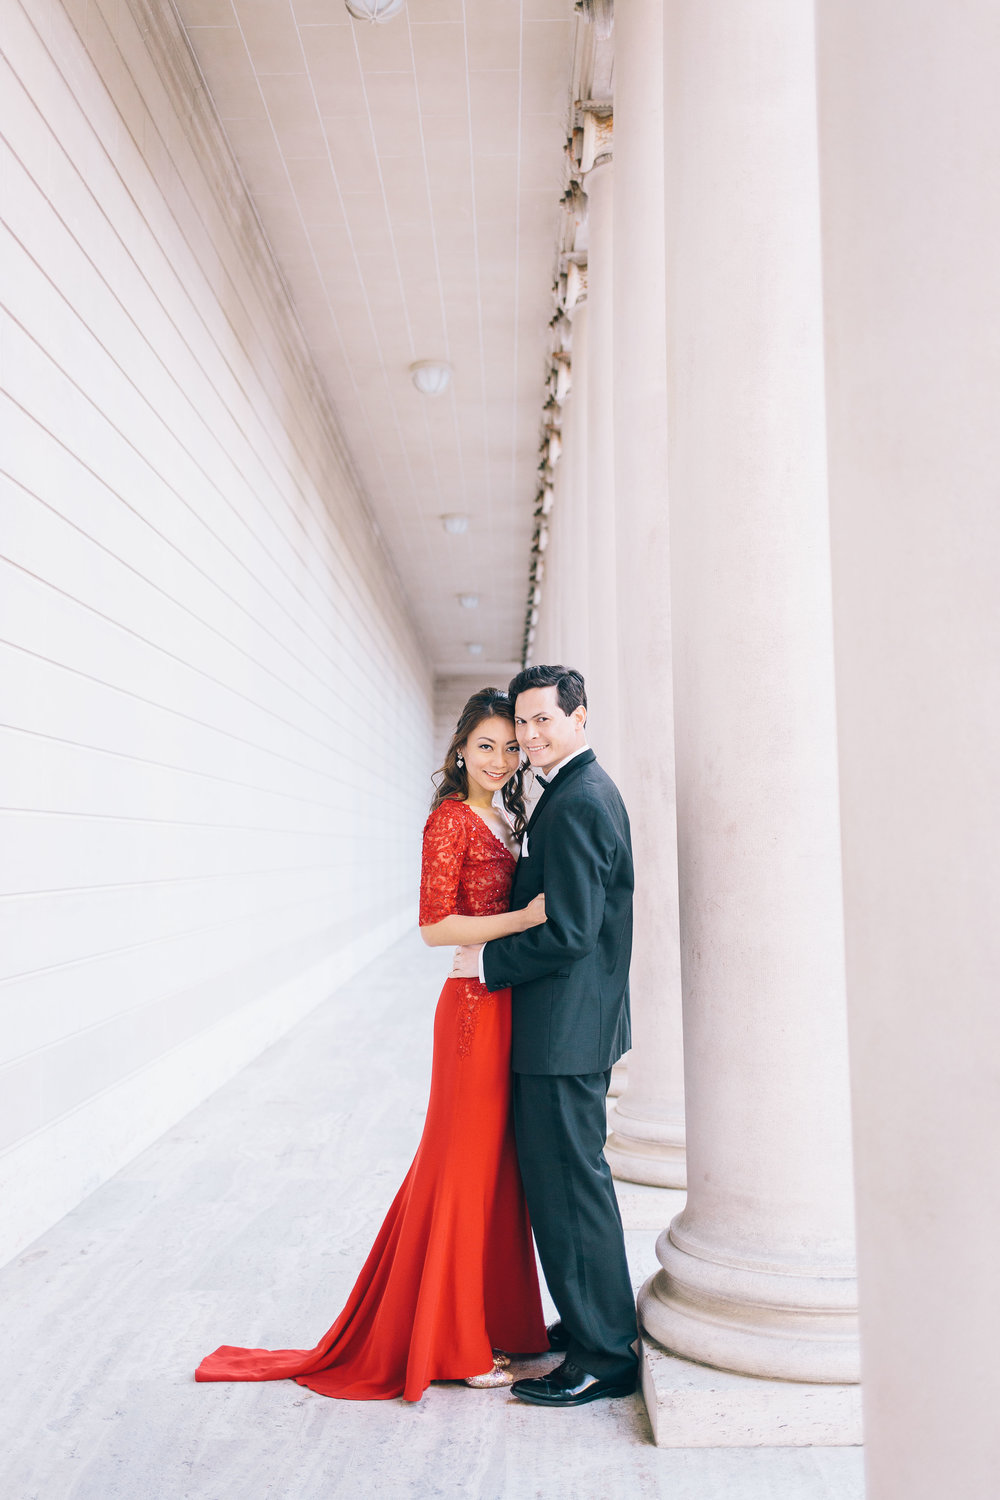 Legion of Honor Engagement Photos by JBJ Pictures - Best Locations for Engagement Photos in SF (2).jpg